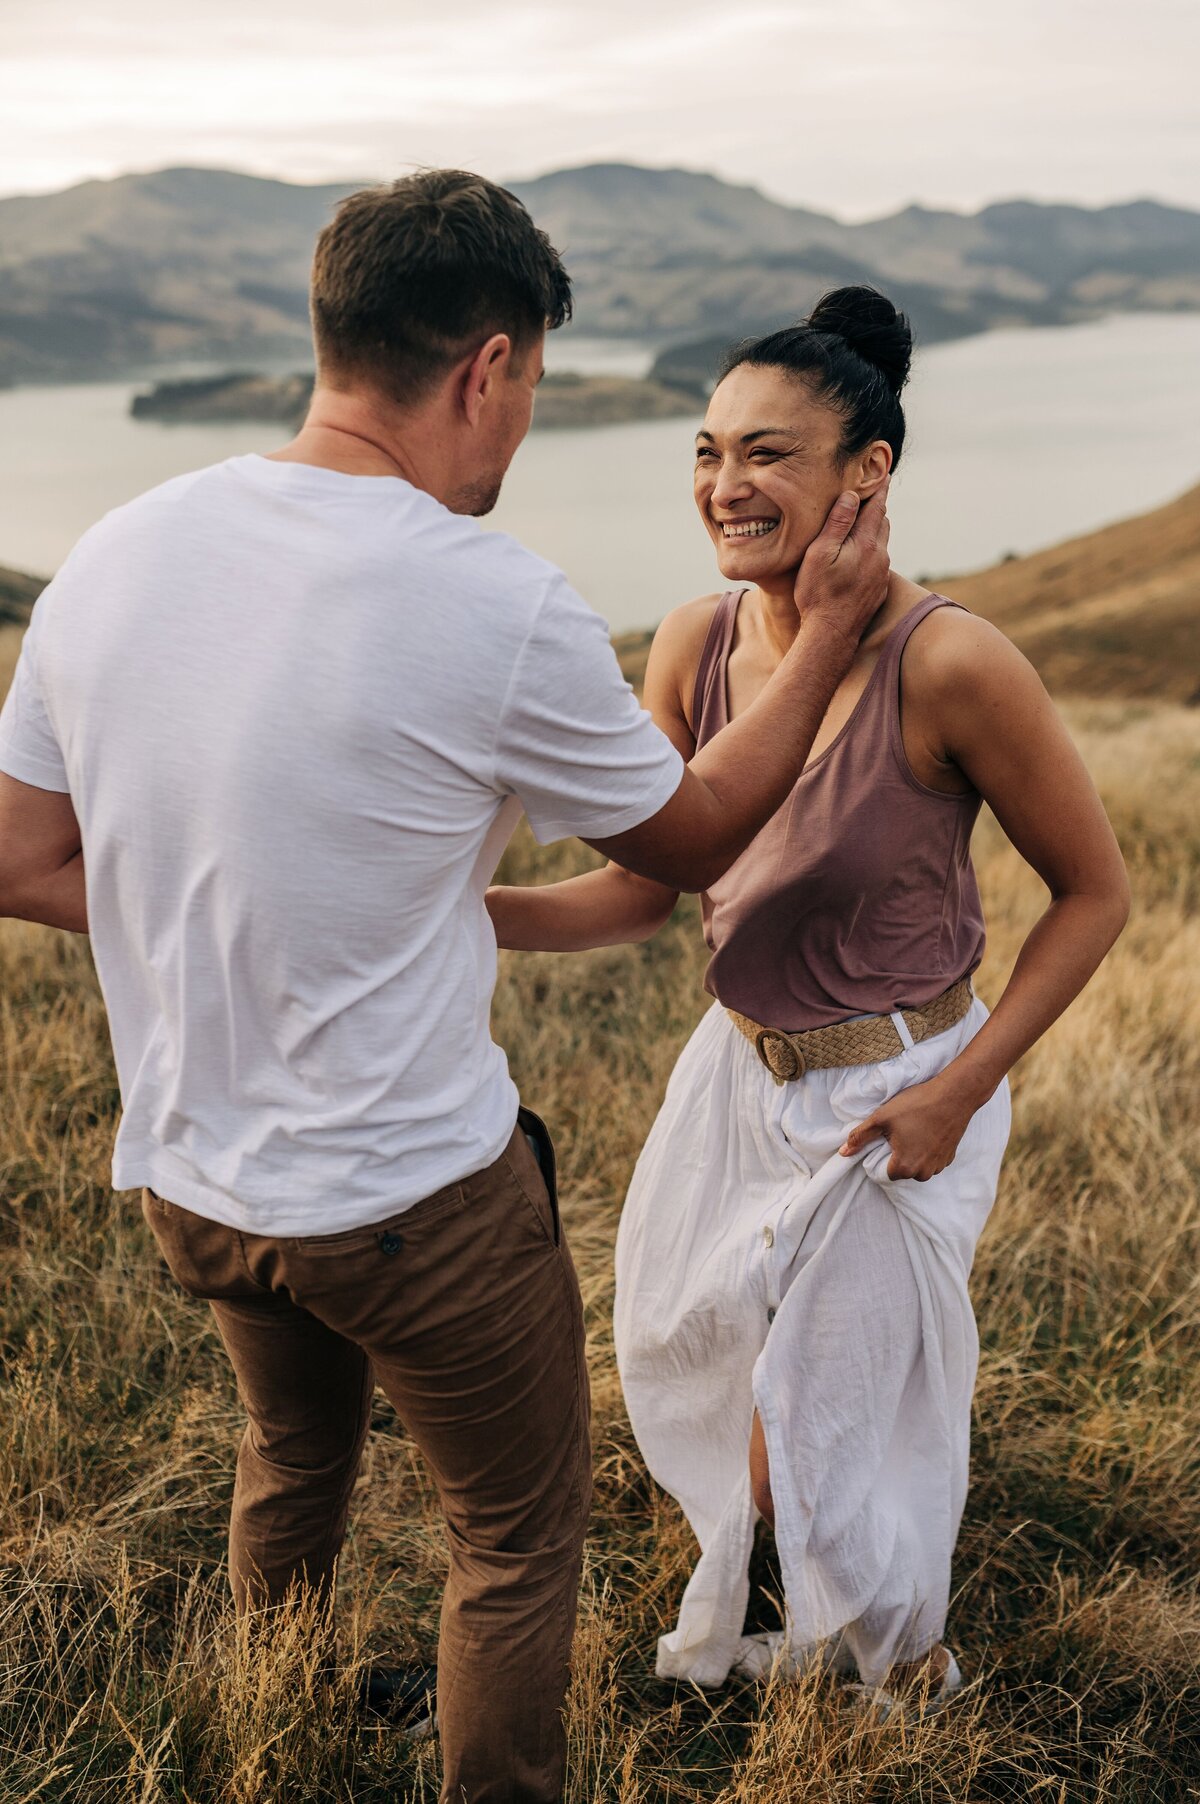 couple port hills christchurch sunrise engagement shoot pink white shirt holding face in love smiling young